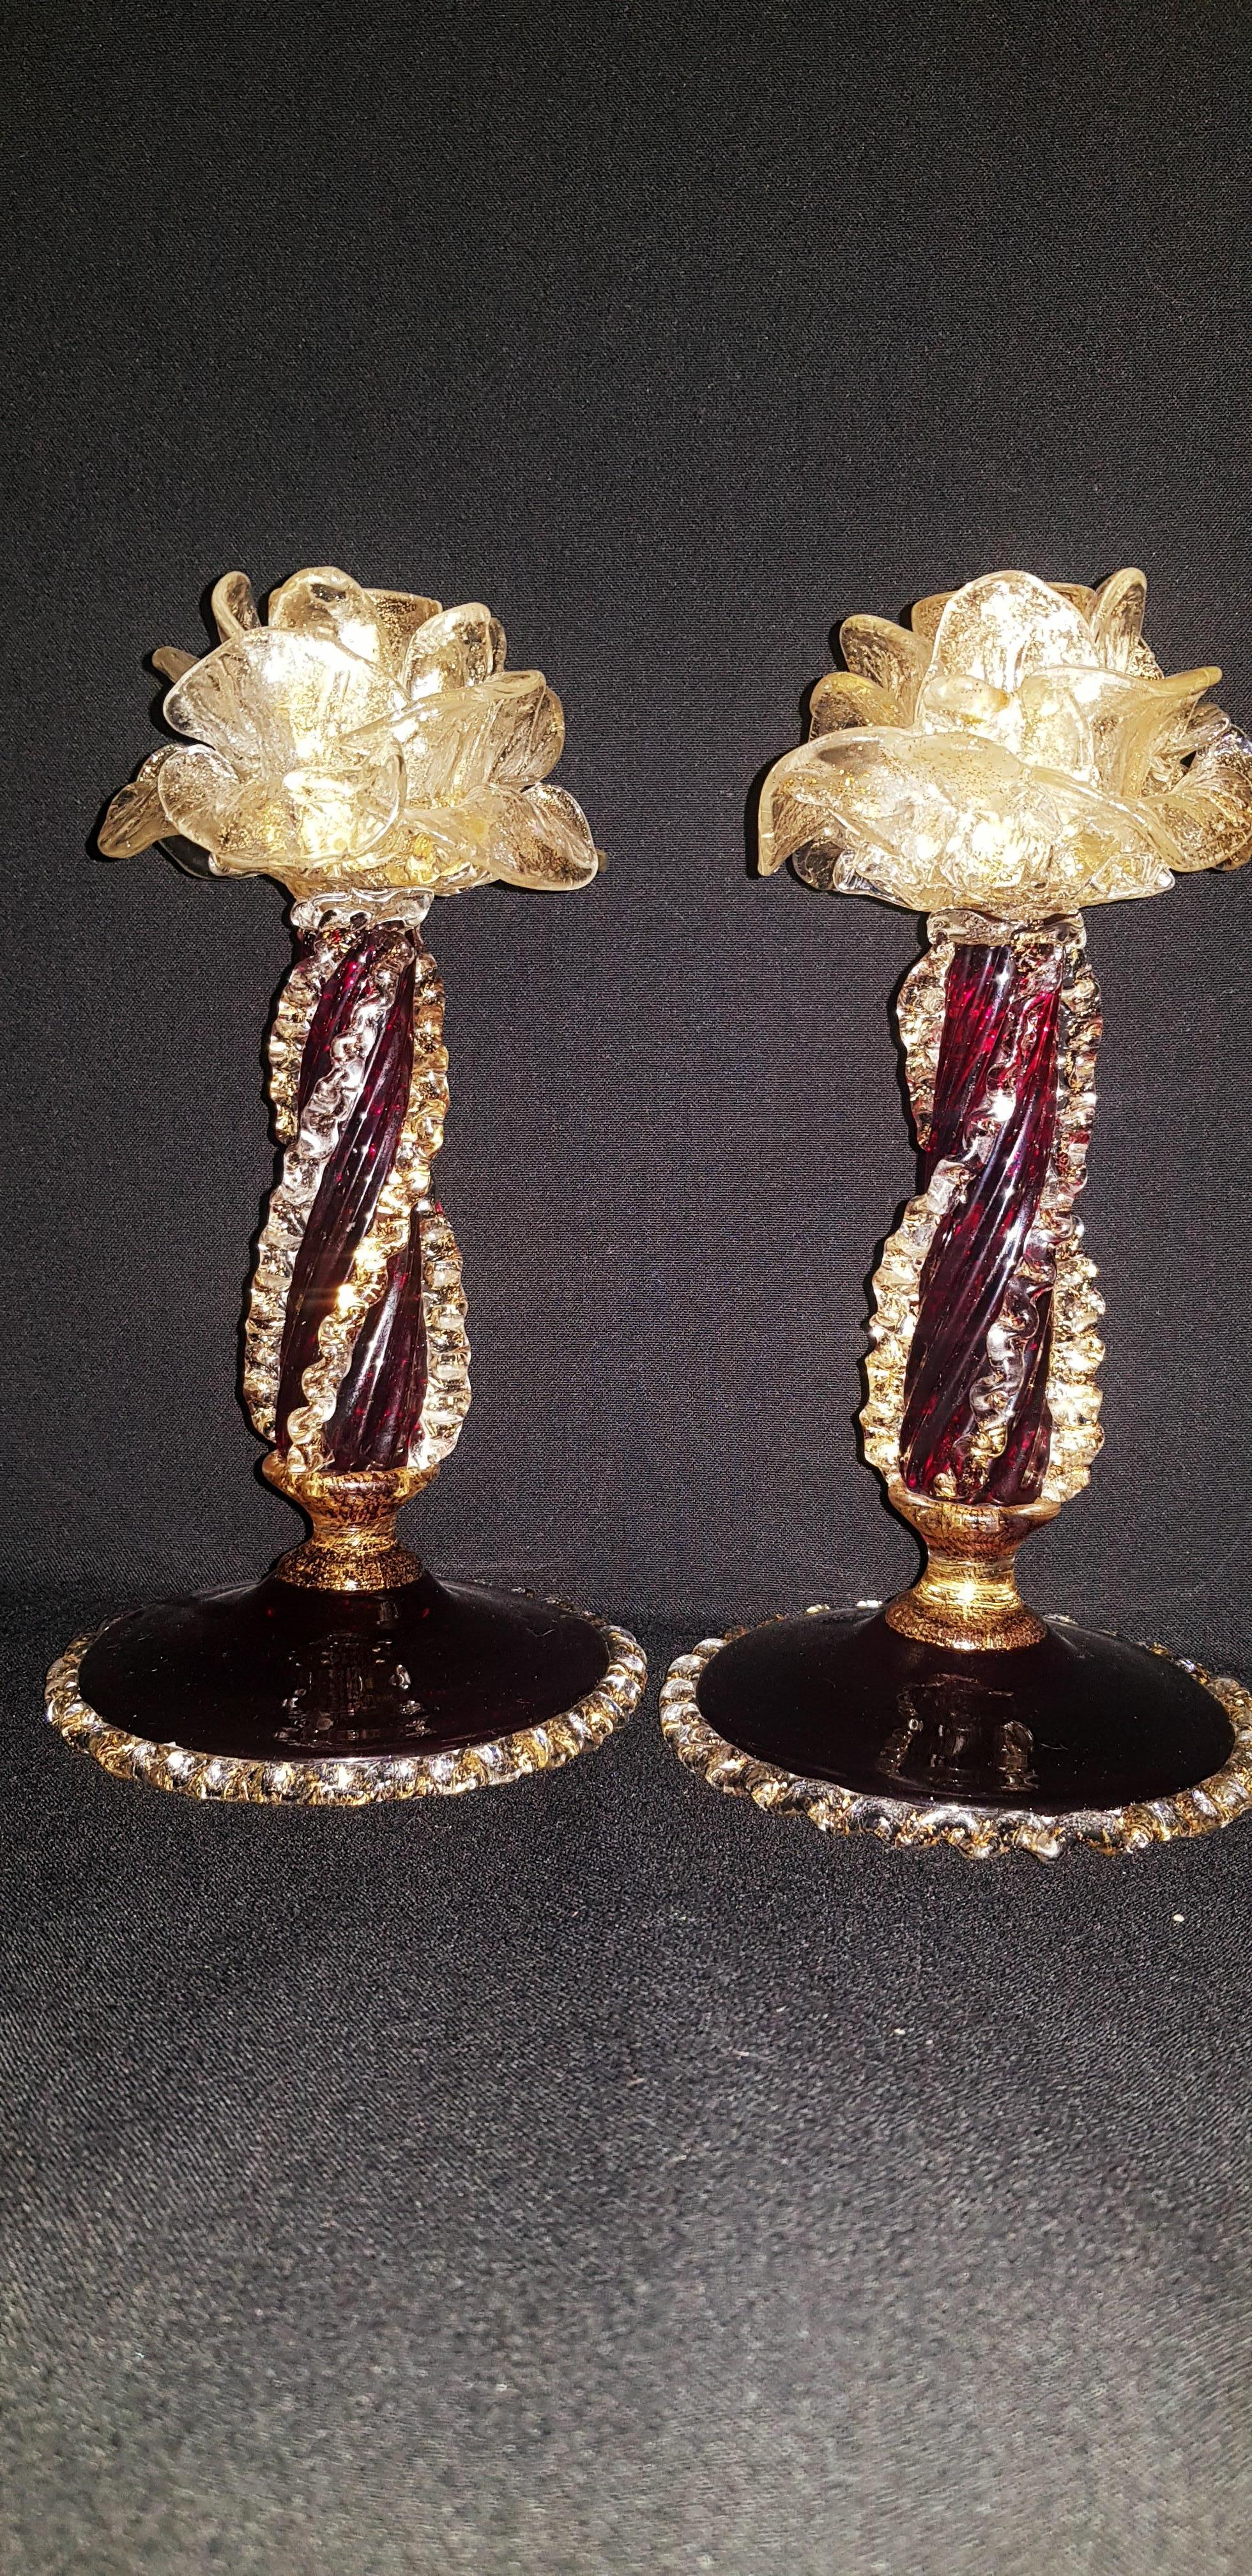 Italian Antique Murano Glass flowers Candle Holders with Gold Leaf 'Salviati' For Sale